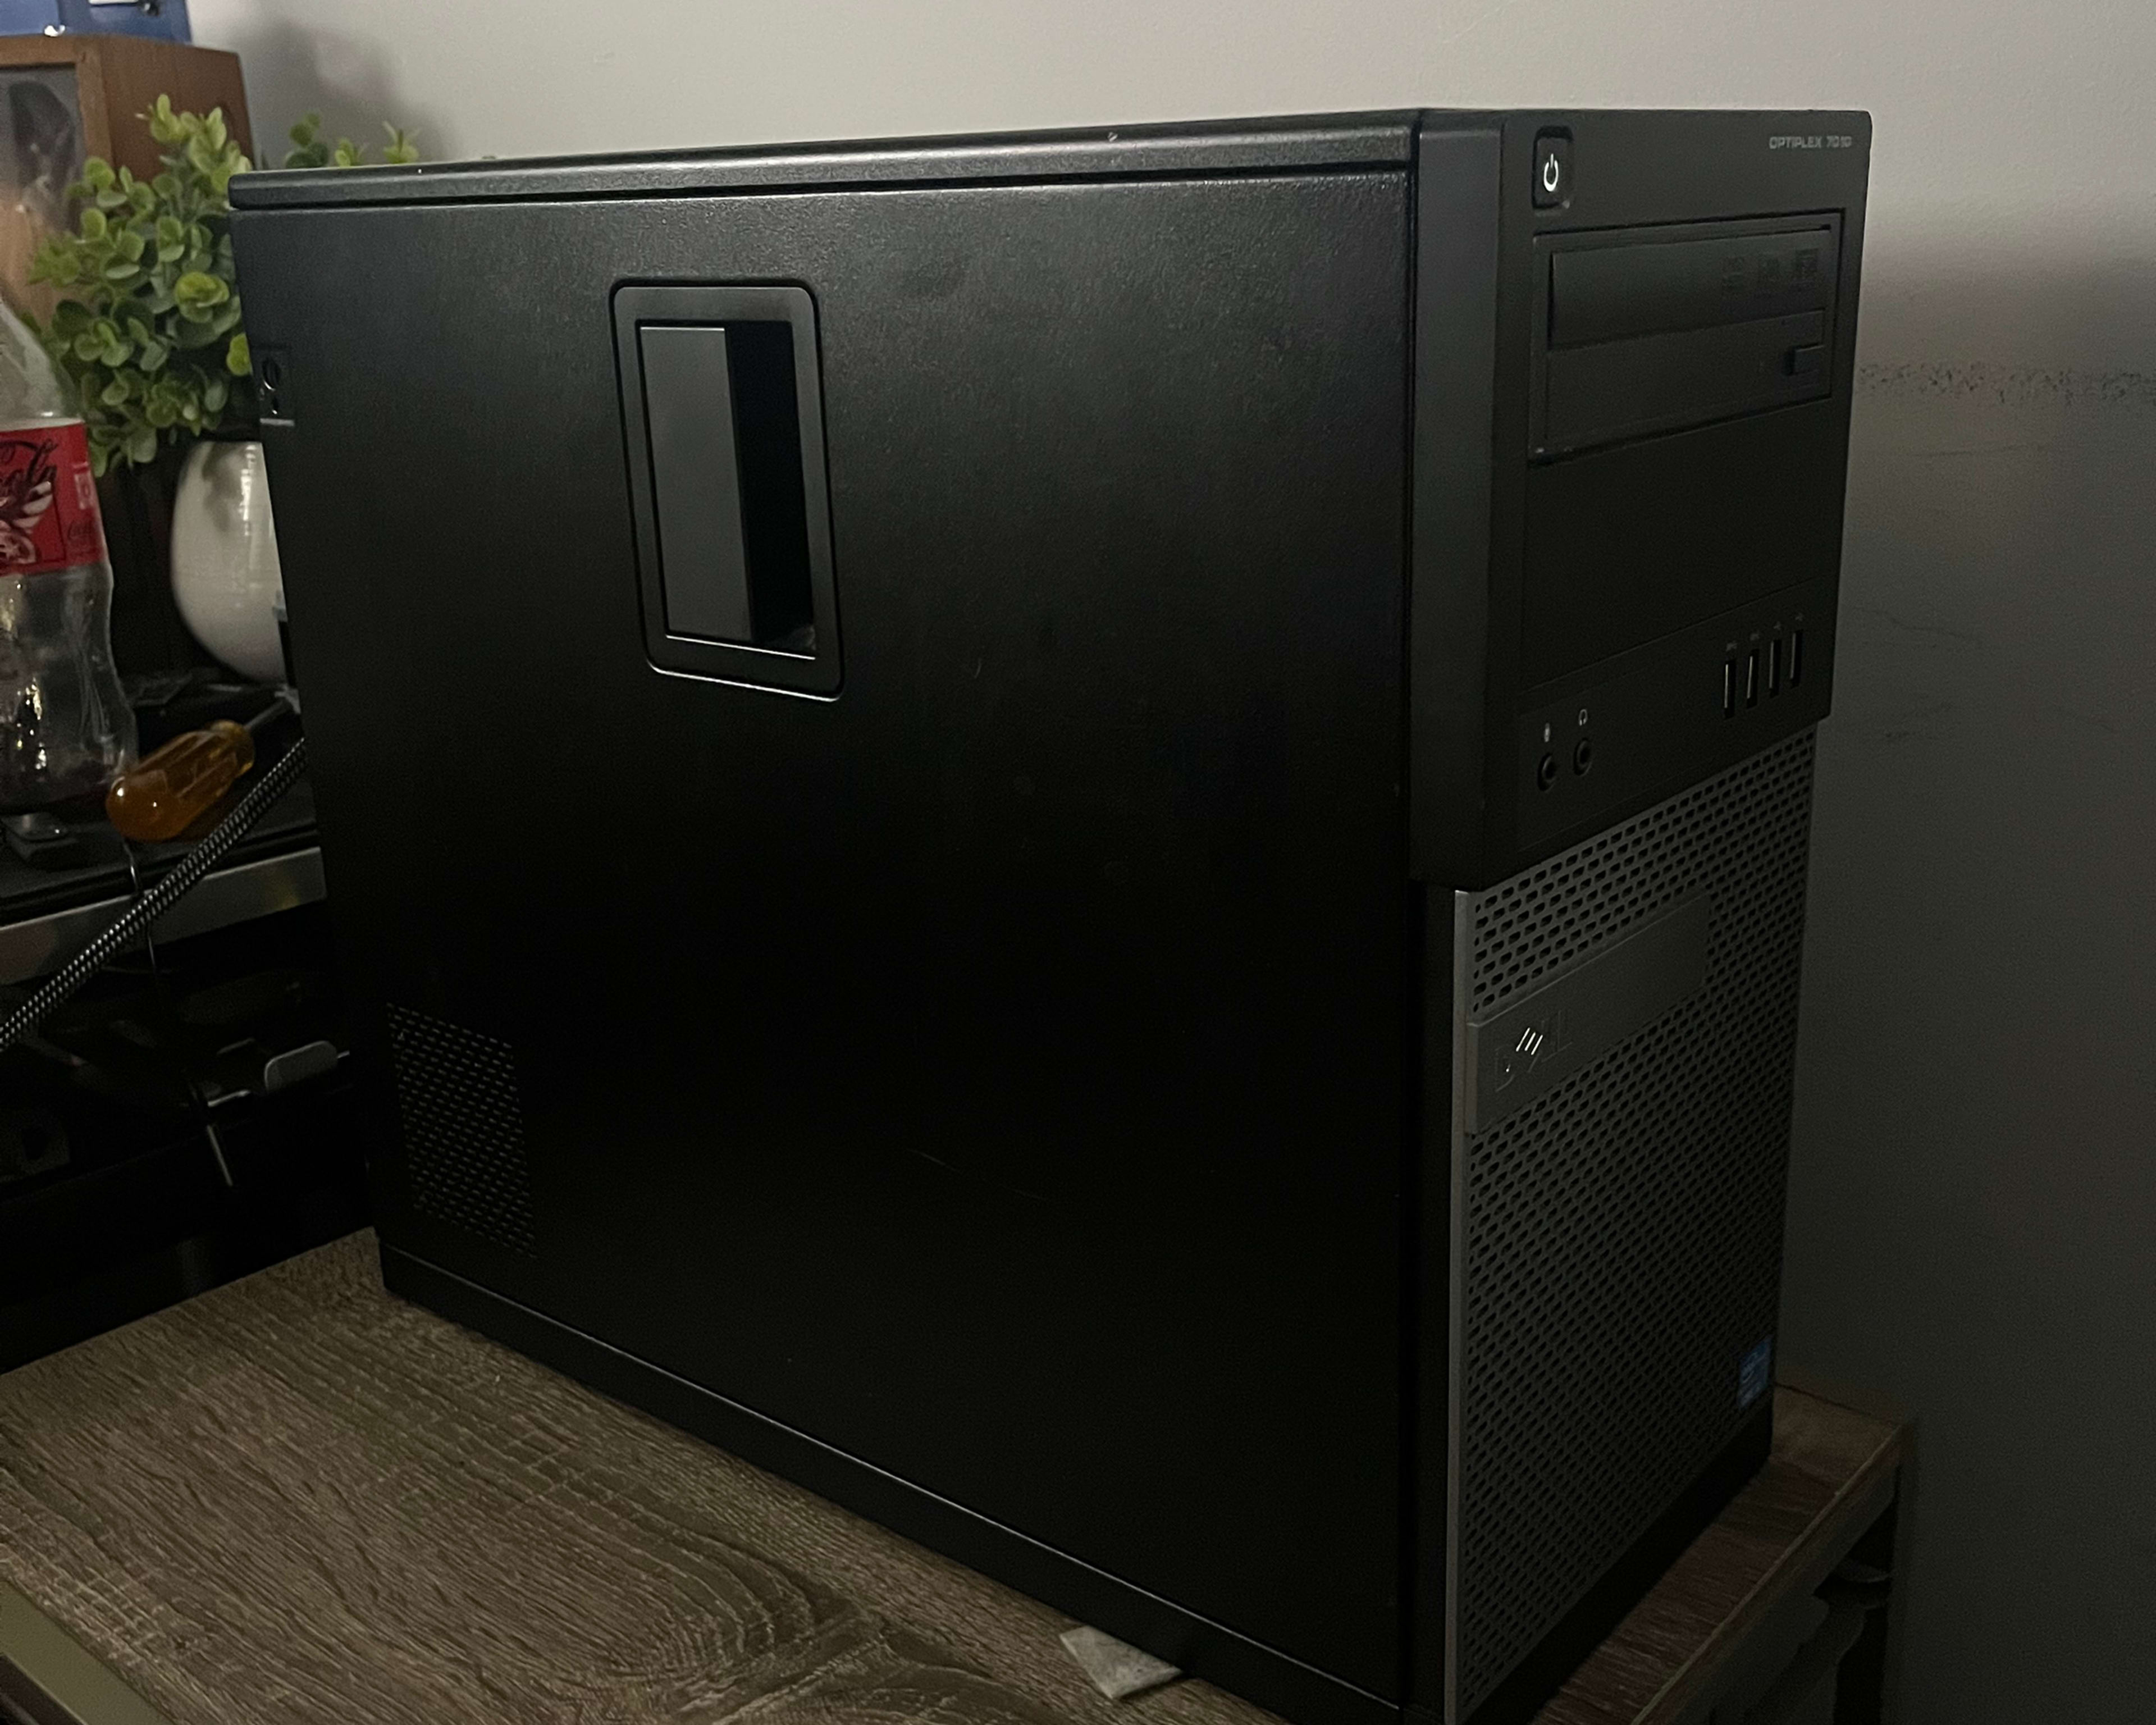 Dell Optiplex 7010 with an Nvidia Gtx960 (4gb) windows 10 fully activated.